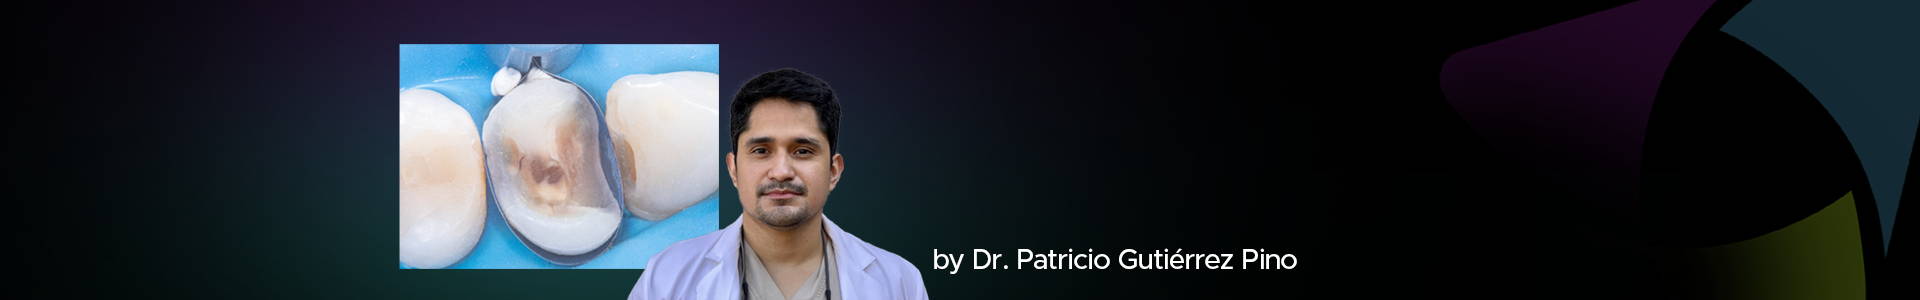 blog banner featuring Dr Pino and a clinical image